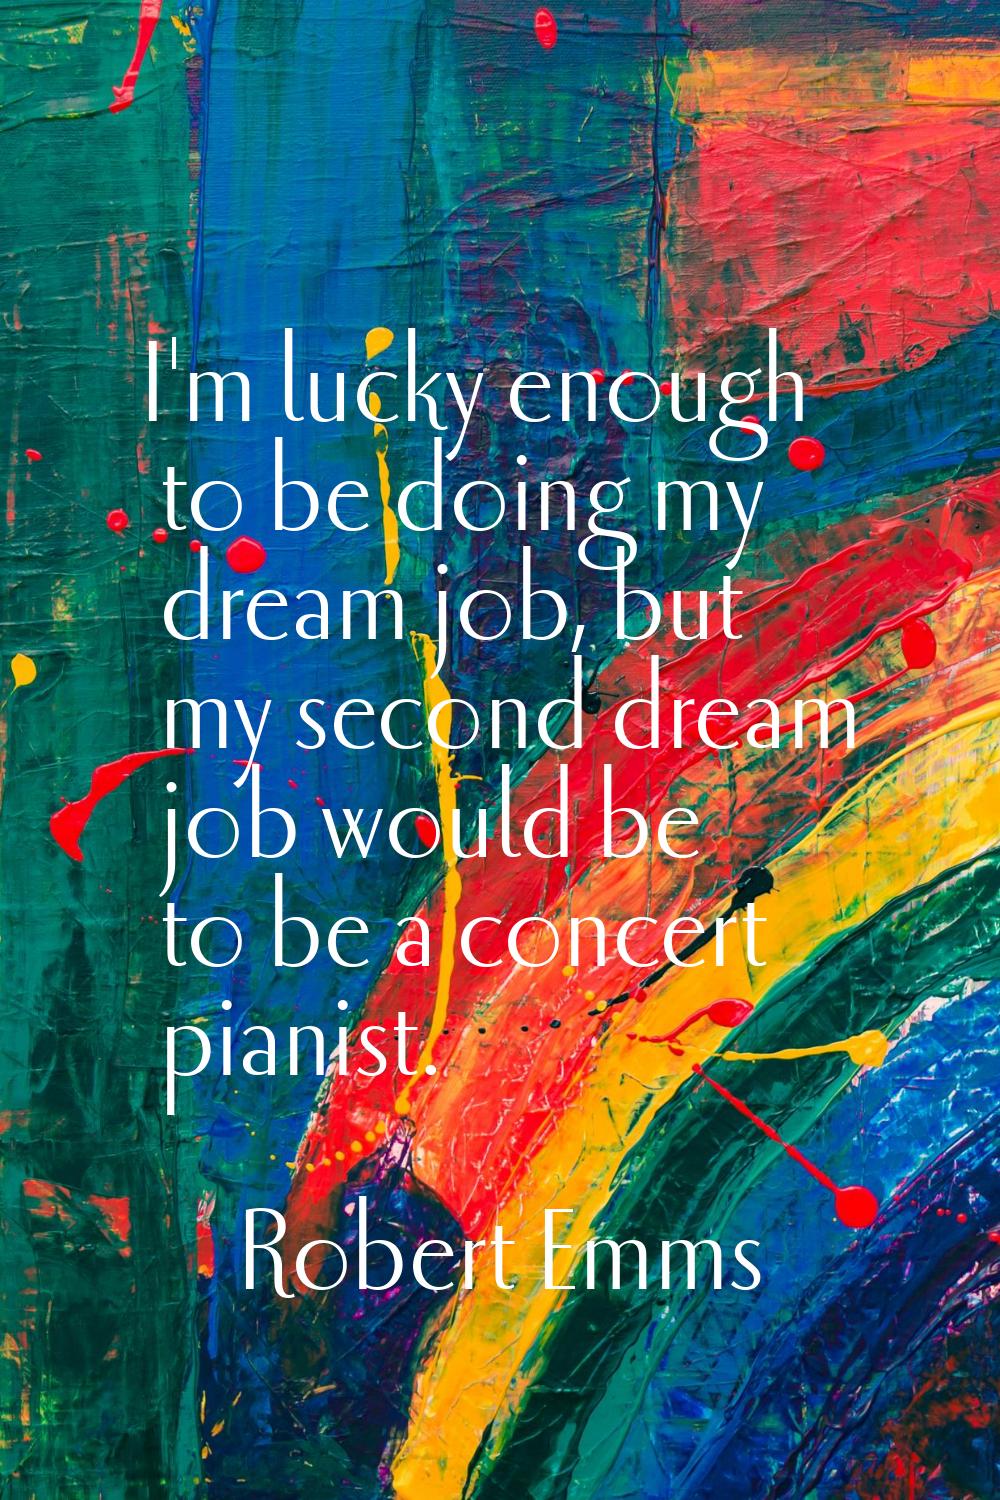 I'm lucky enough to be doing my dream job, but my second dream job would be to be a concert pianist